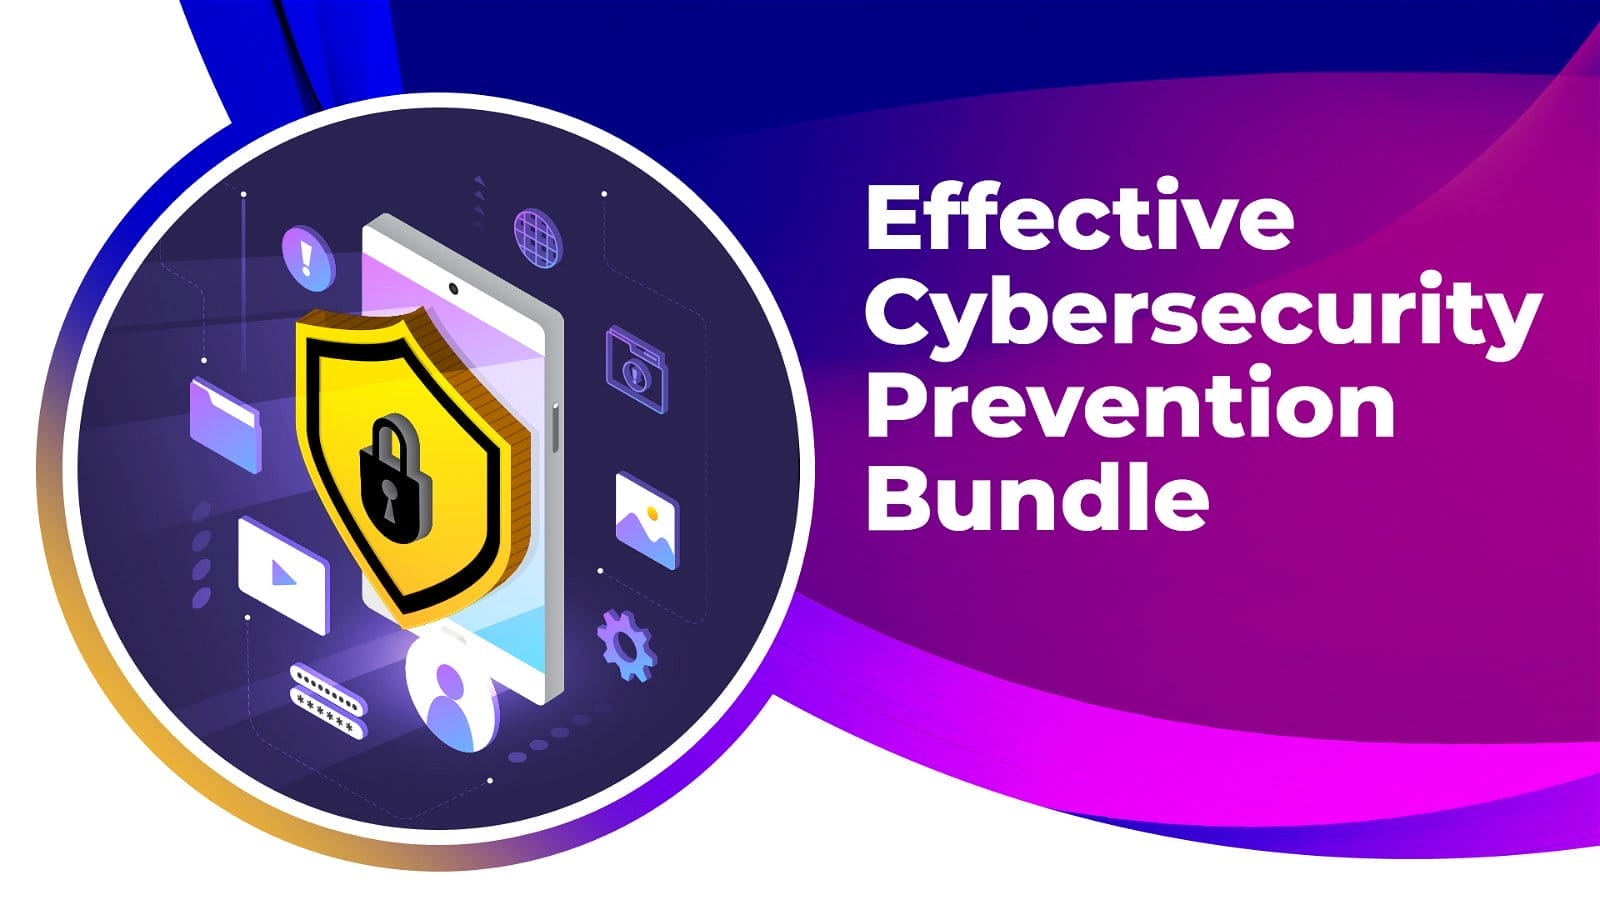 Effective Cybersecurity Prevention Bundle